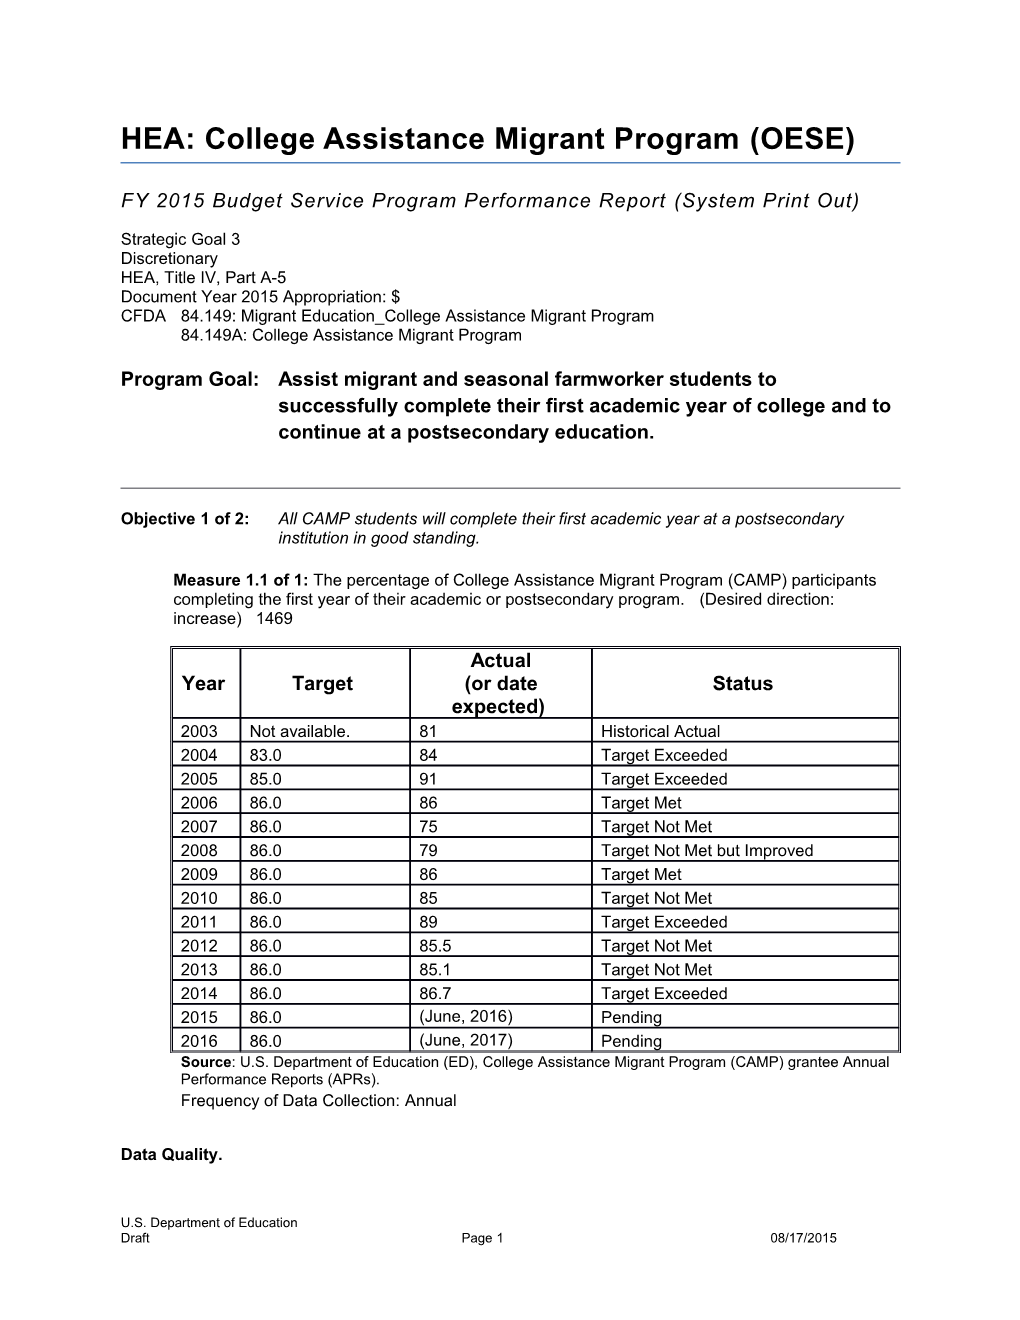 FY 2015 Budget Service Program Performance Report for CAMP (MS Word)